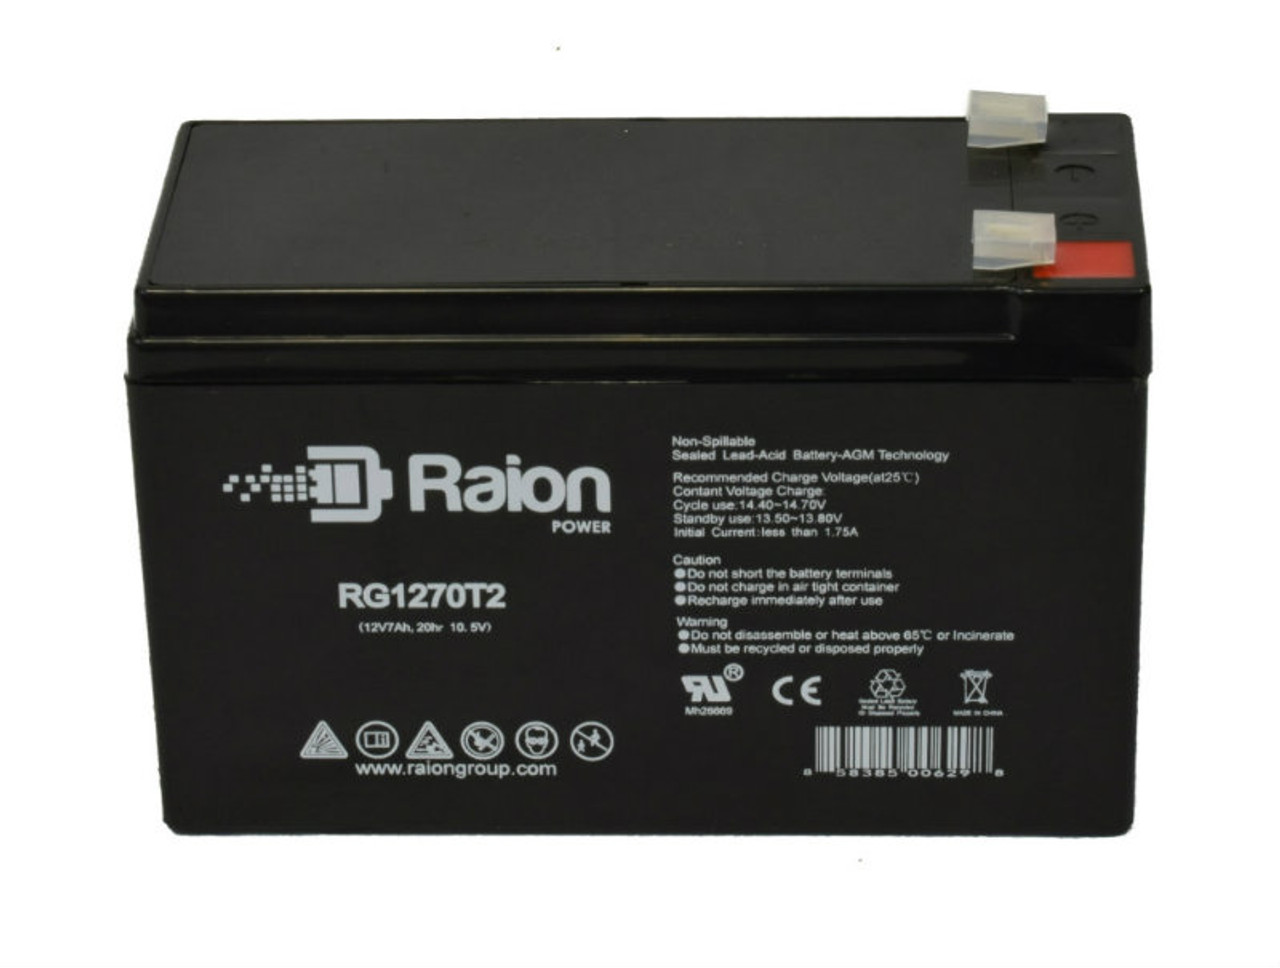 Raion Power RG1270T2 12V 7Ah Lead Acid Battery for Hill-Rom Affinity III Bed